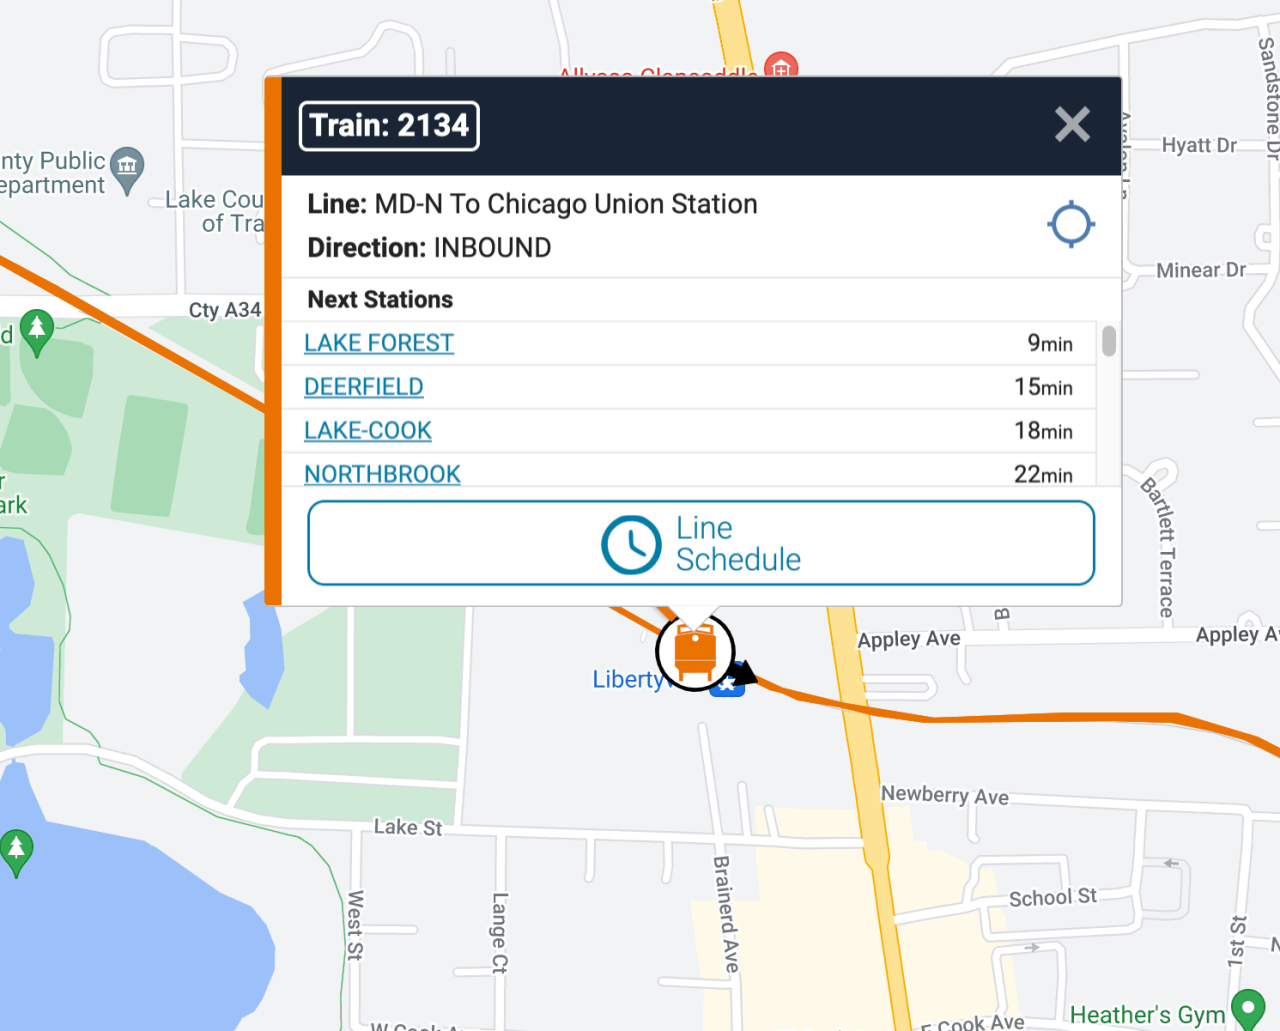 Clicking on a train icon on the map gets you its predicted arrival times at upcoming stations.